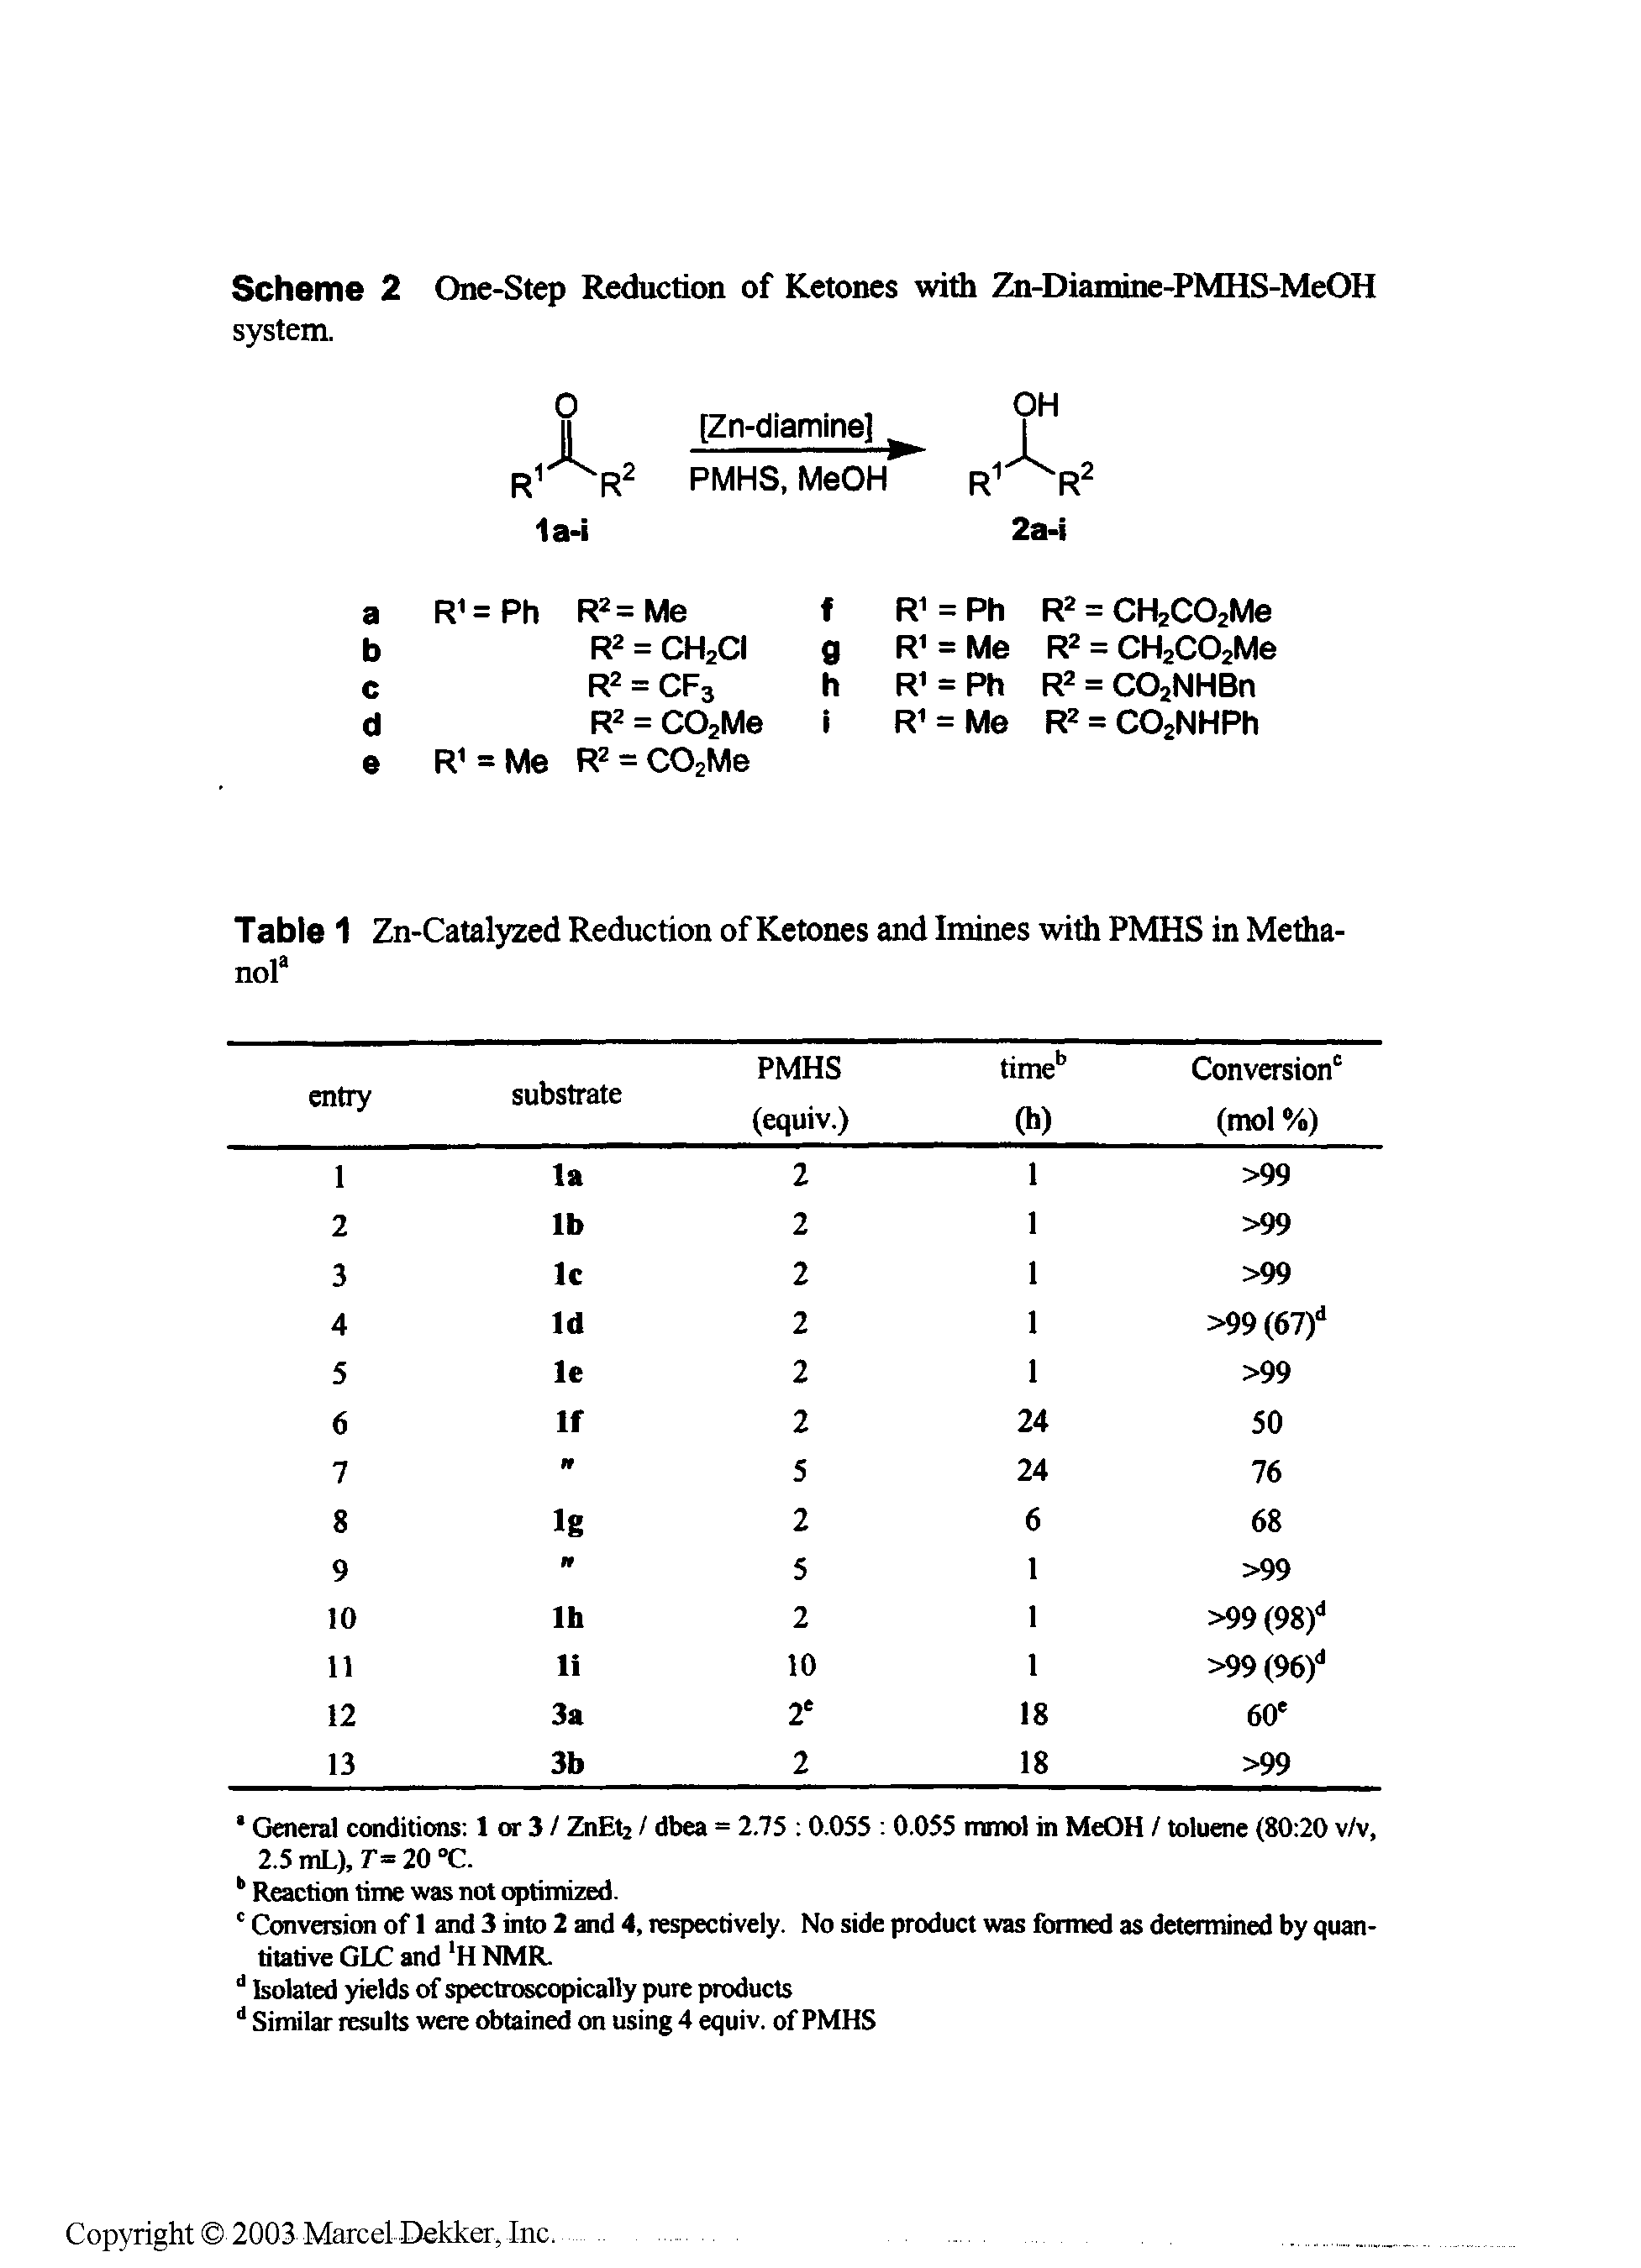 Table 1 Zn-Catalyzed Reduction of Ketones and Imines with PMHS in Media-nof...